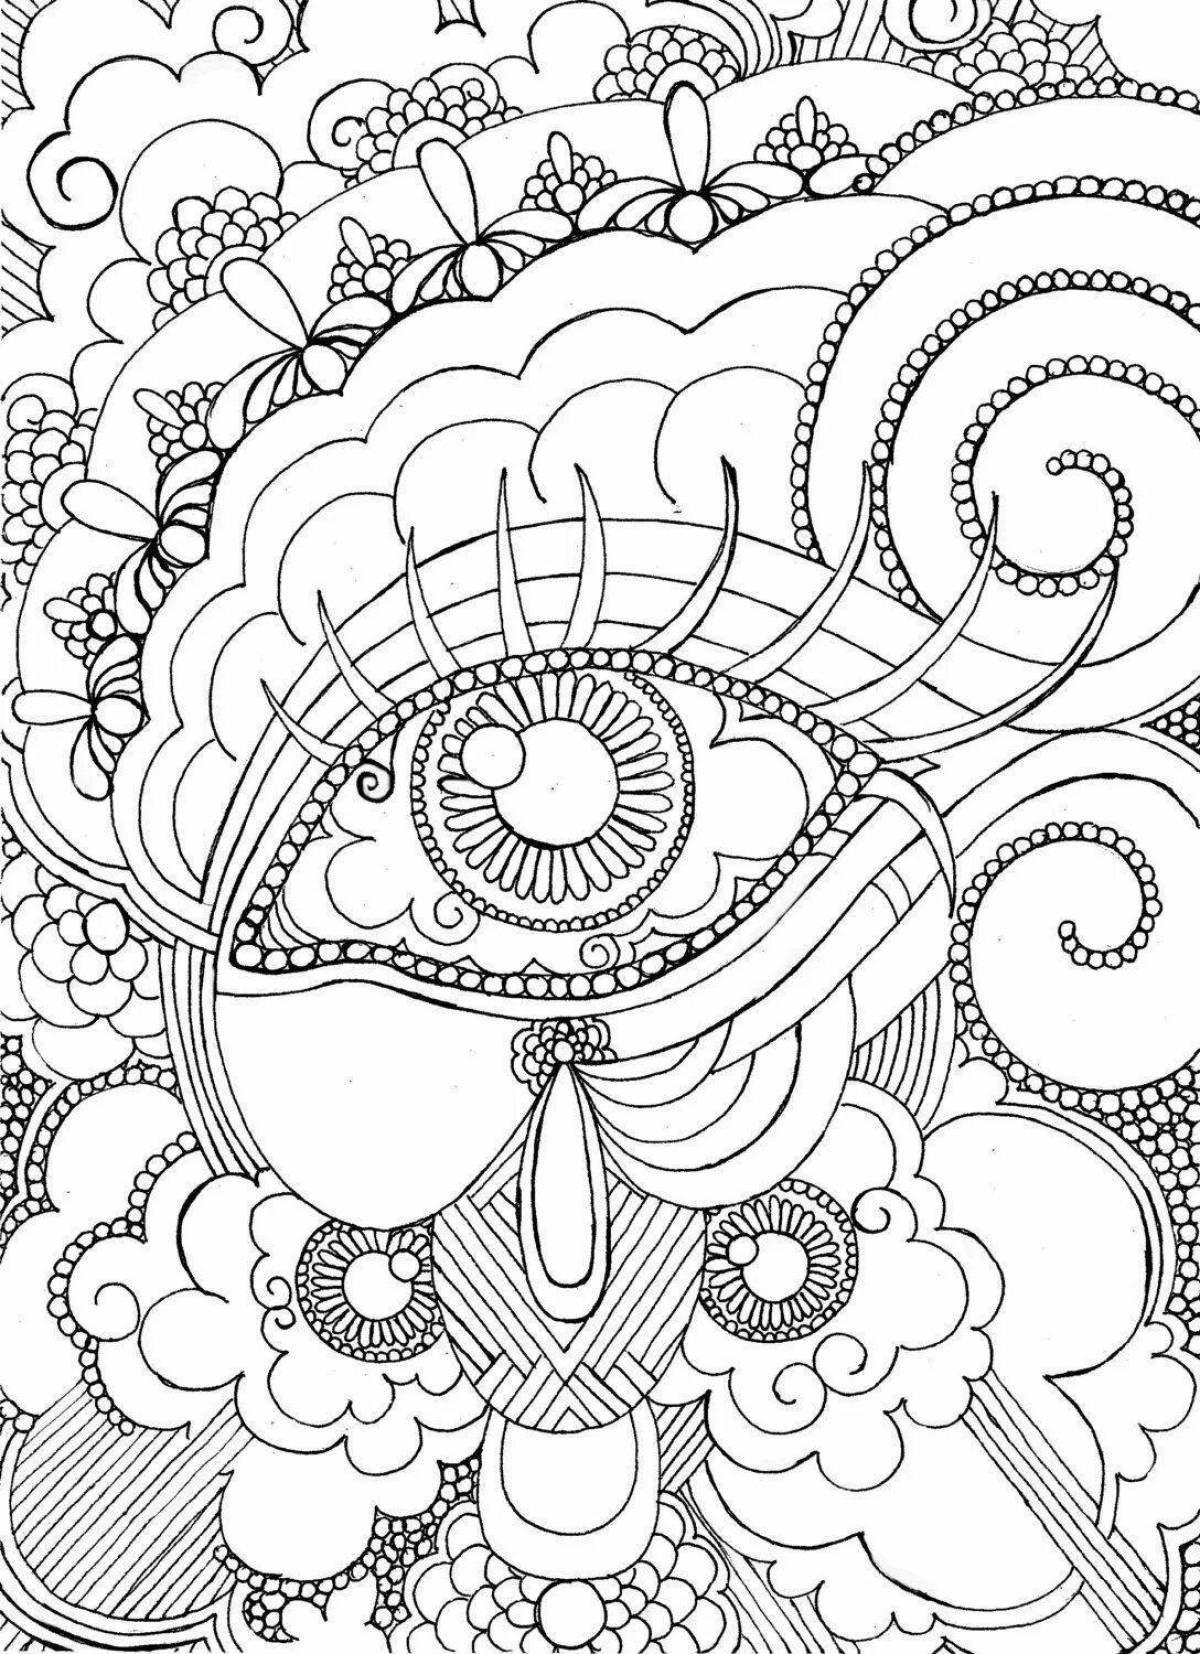 Colorful psychological coloring book for preschoolers